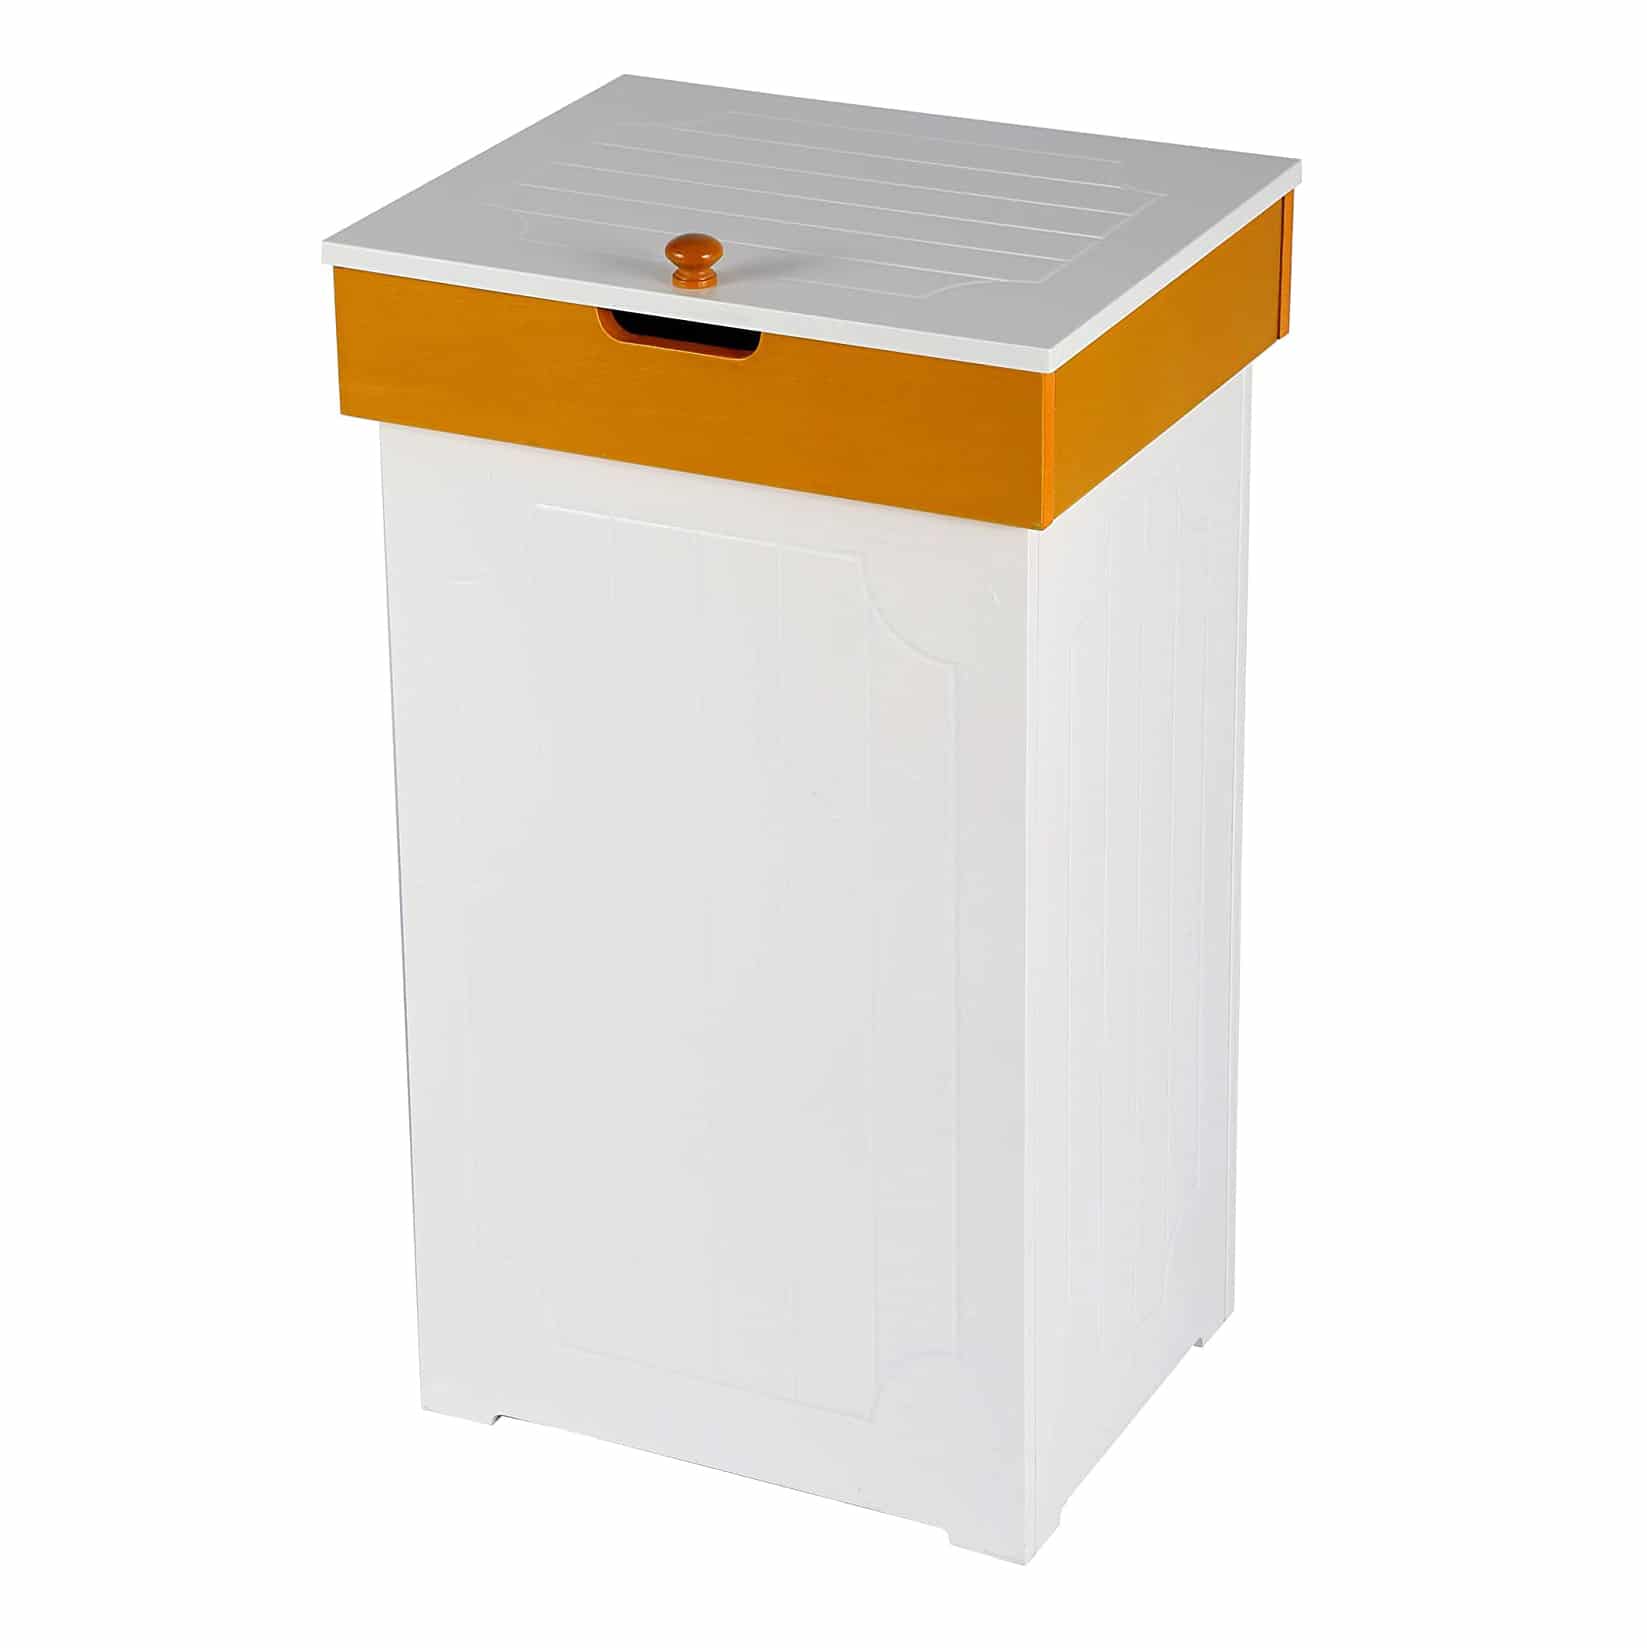 Top 10 Best Outdoor Trash Cans in 2021 Reviews | Guide